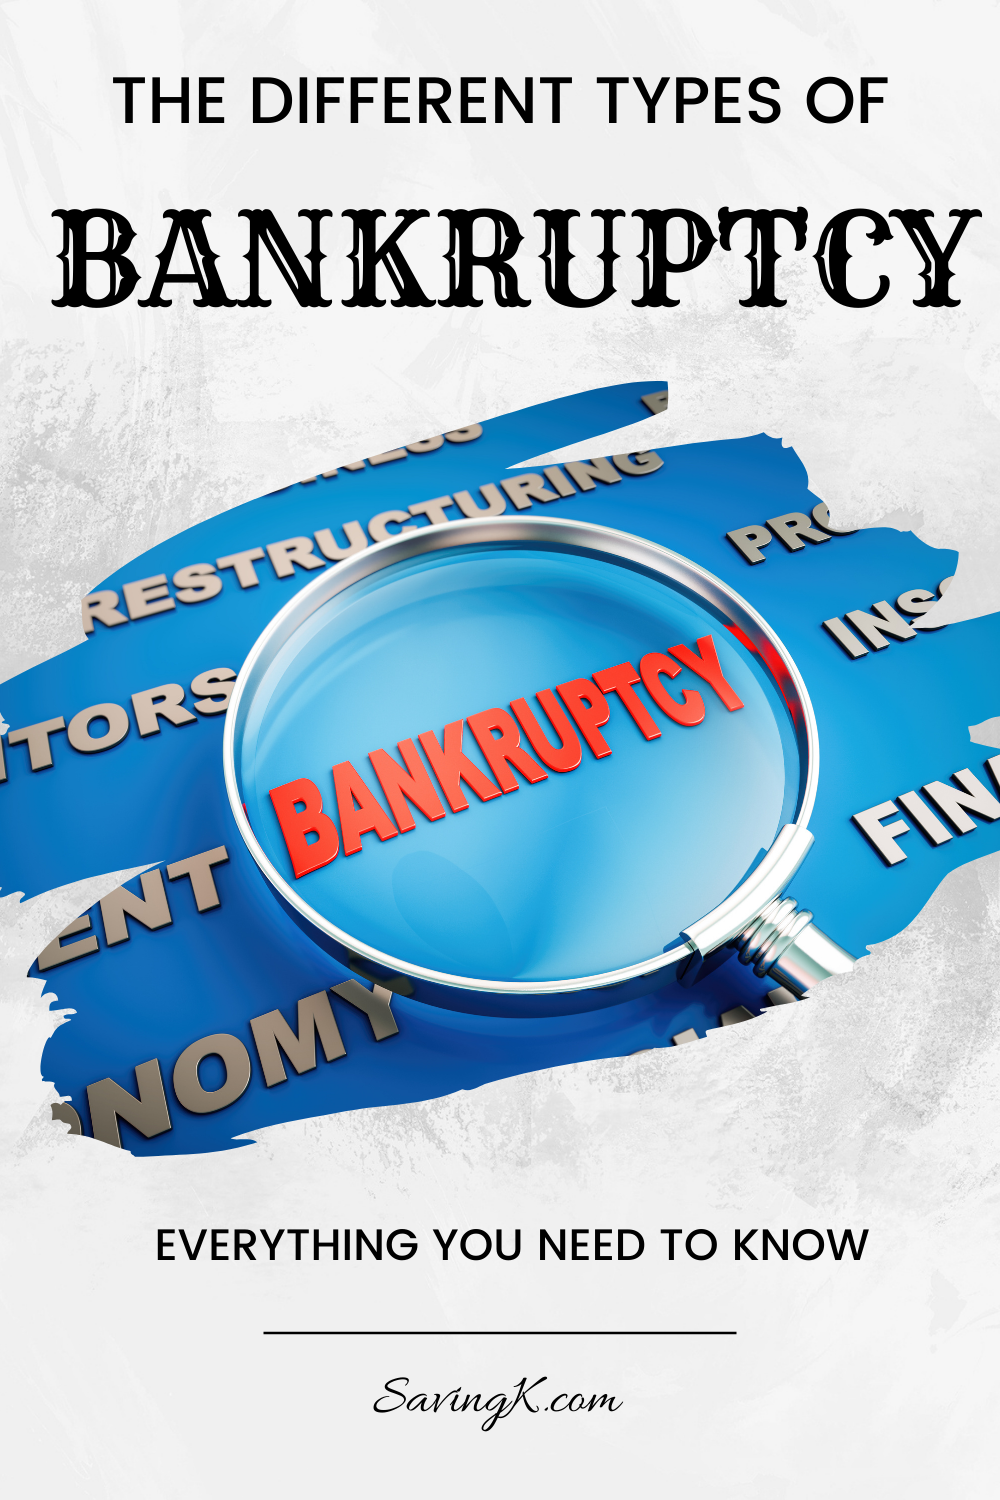 The Different Types of Bankruptcy